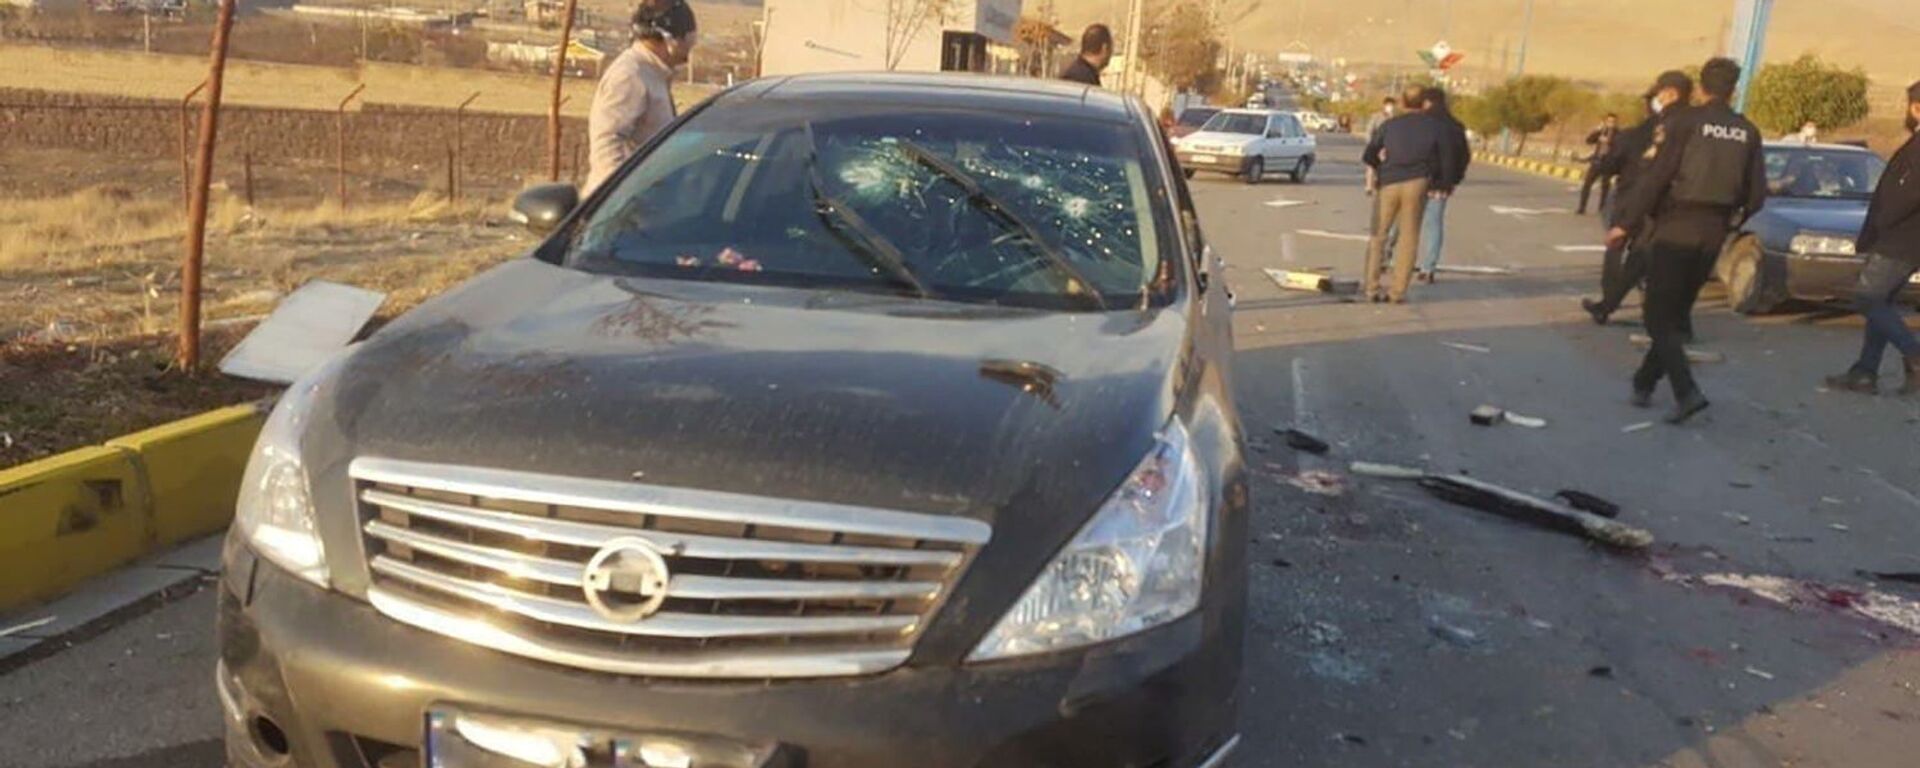 A view shows the scene of the attack that killed Prominent Iranian scientist Mohsen Fakhrizadeh, outside Tehran, Iran, November 27, 2020. - Sputnik International, 1920, 14.12.2020